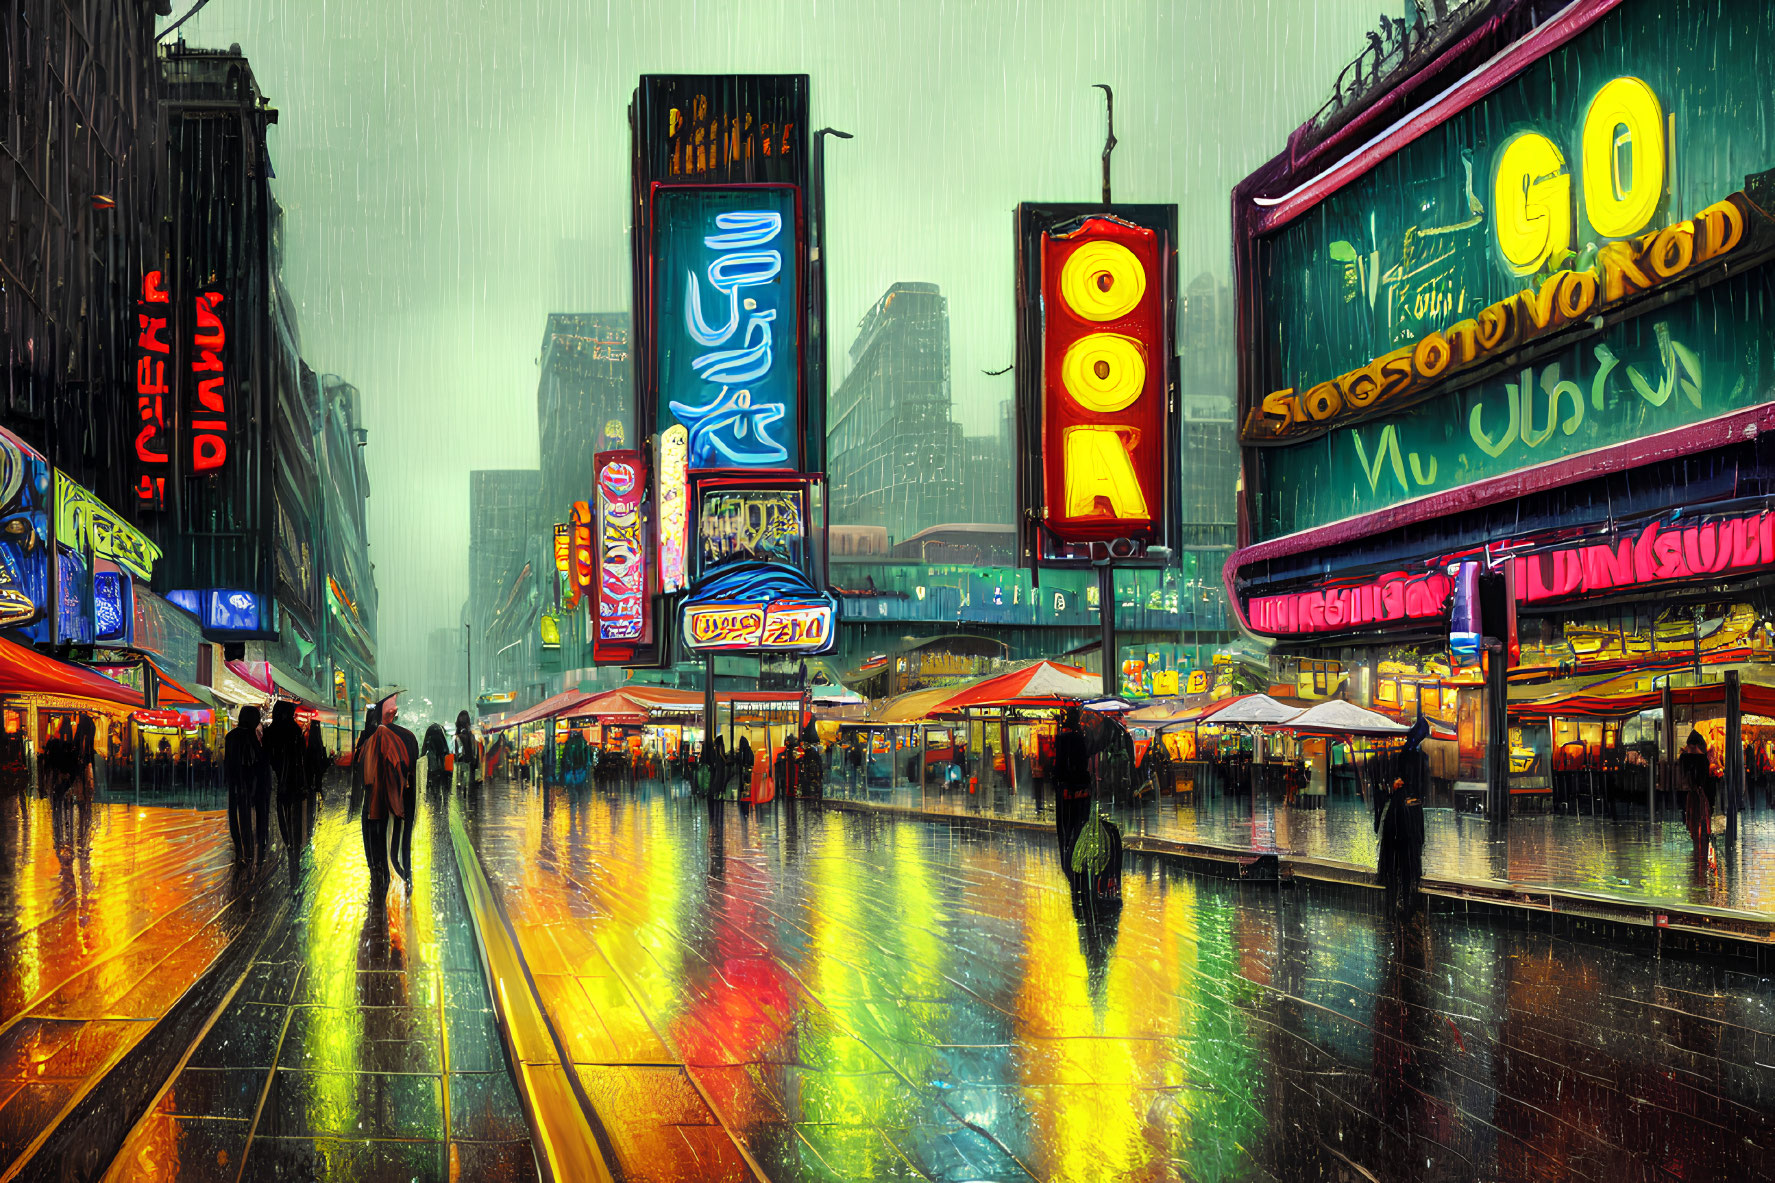 Urban night scene: Rainy city street with neon signs, wet pavement, and pedestrians with umbrellas